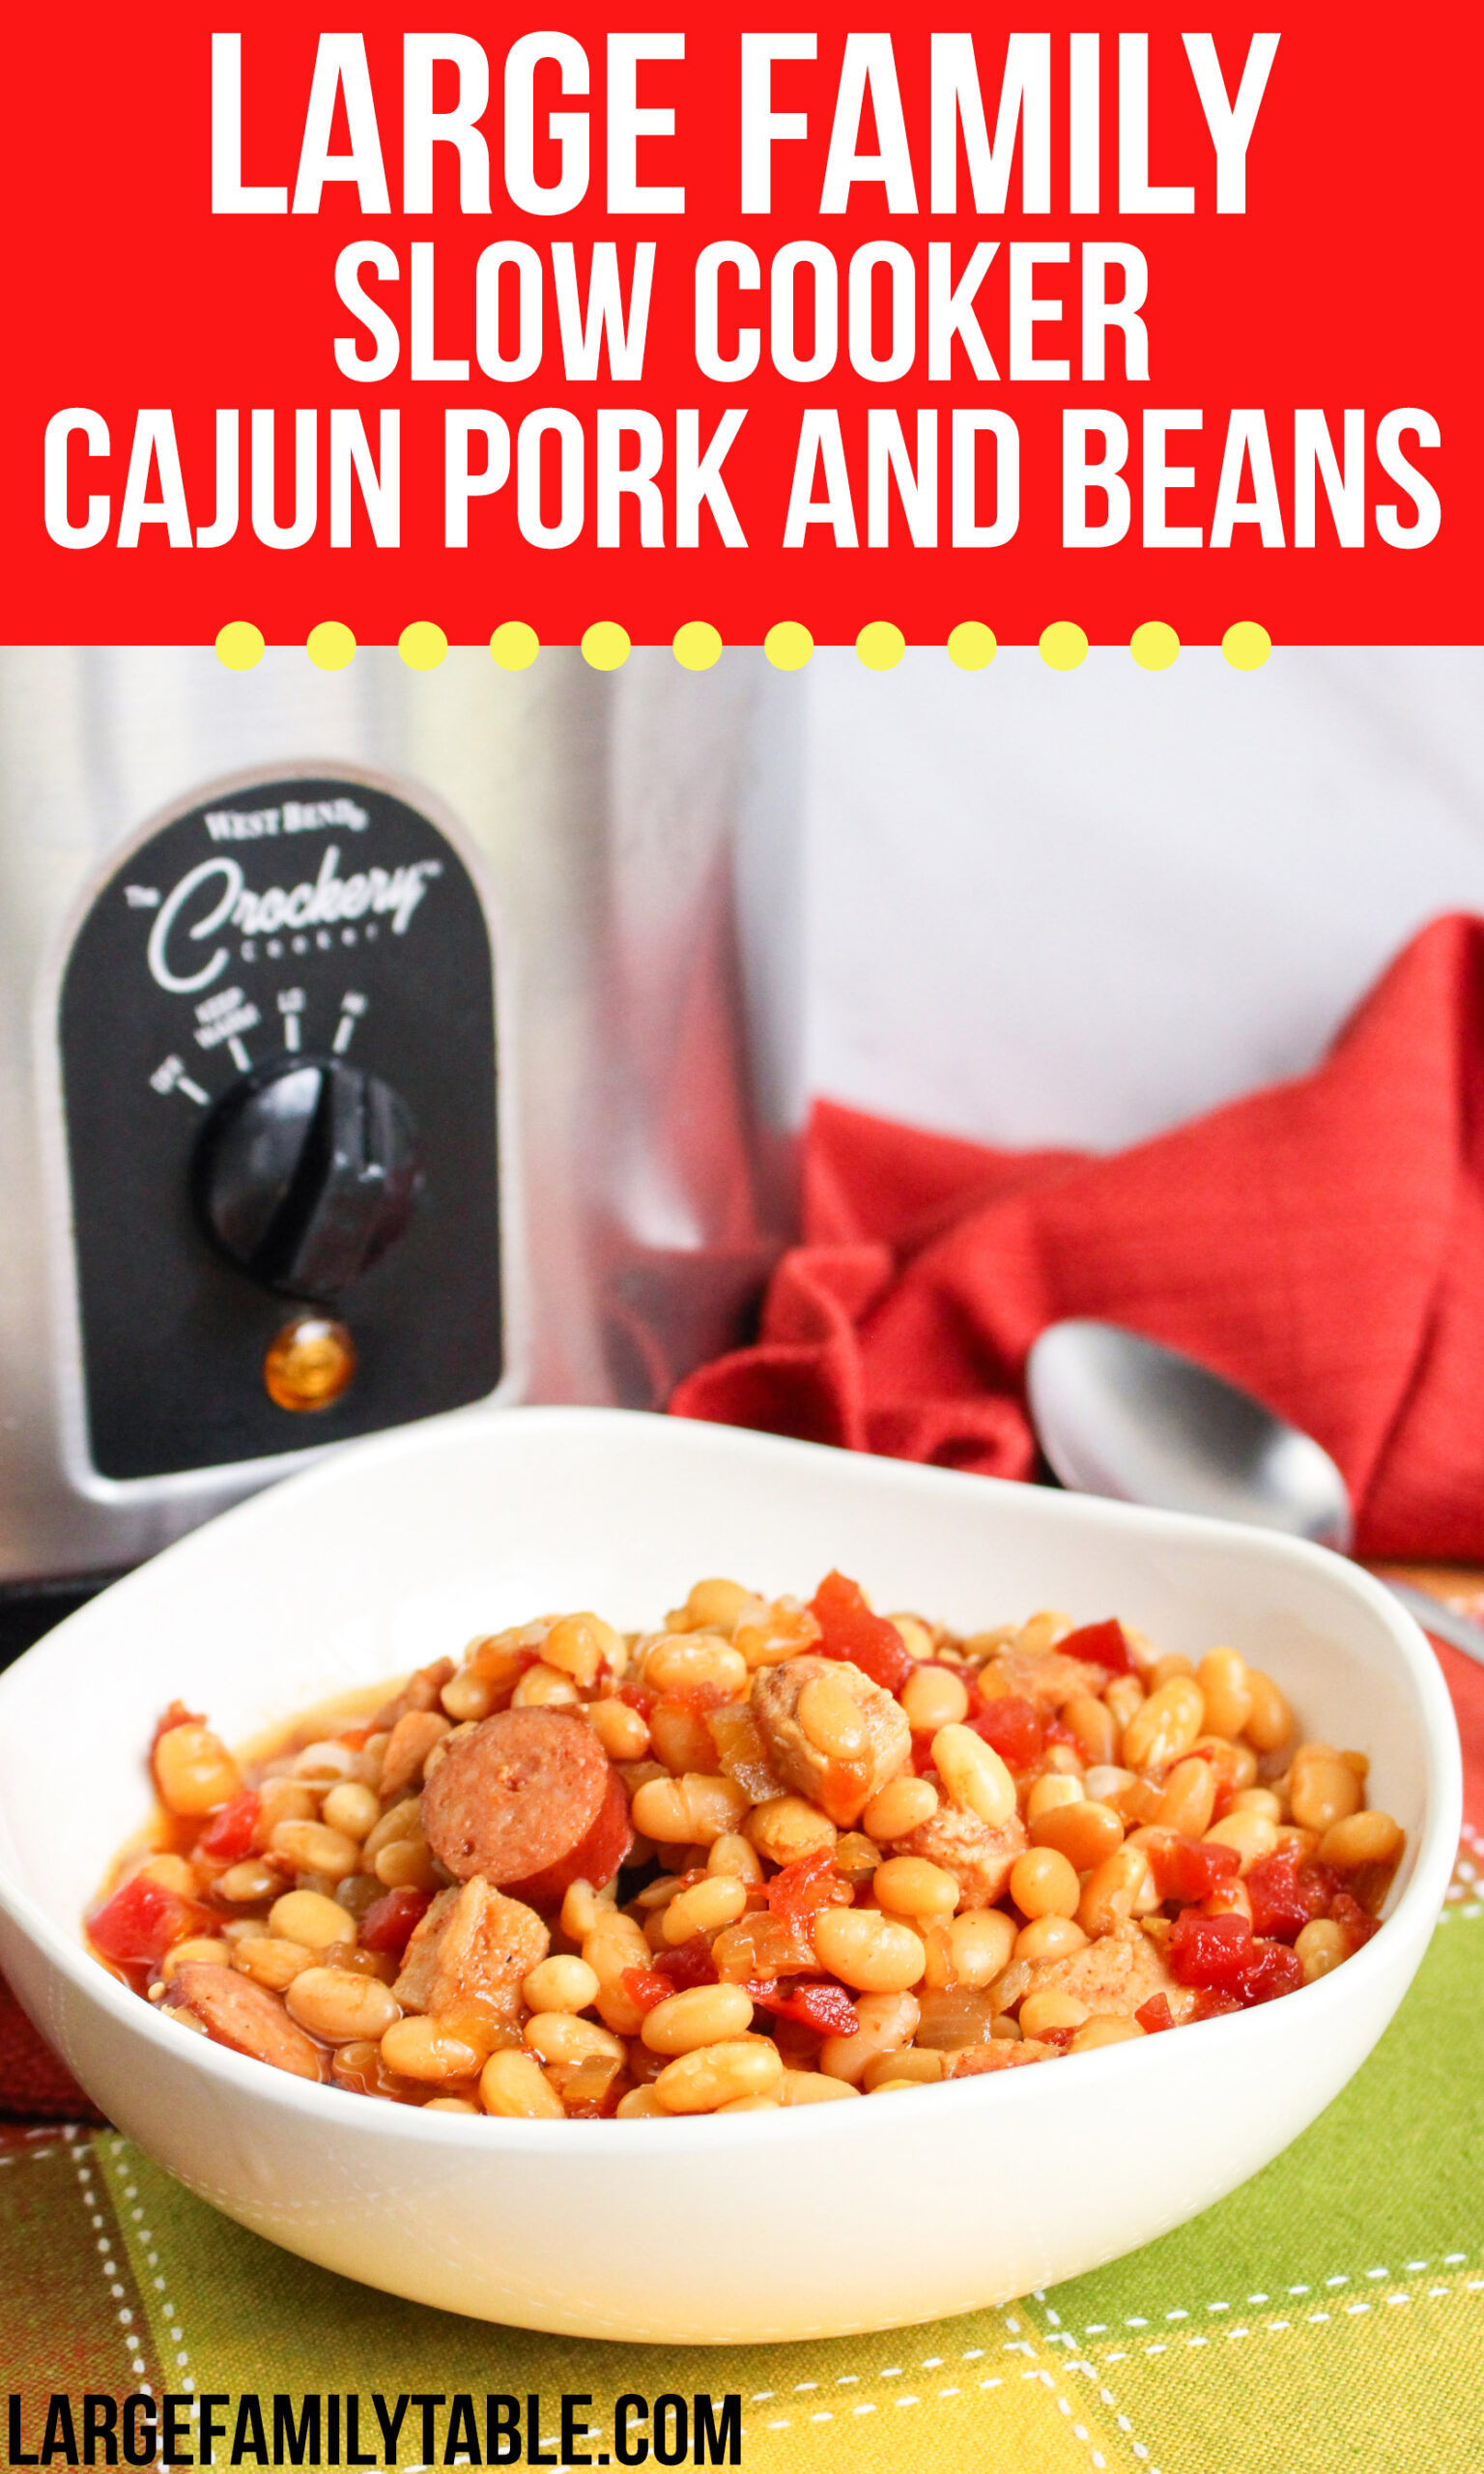 Large-Family-Slow-Cooker-Cajun-Pork-and-Beans